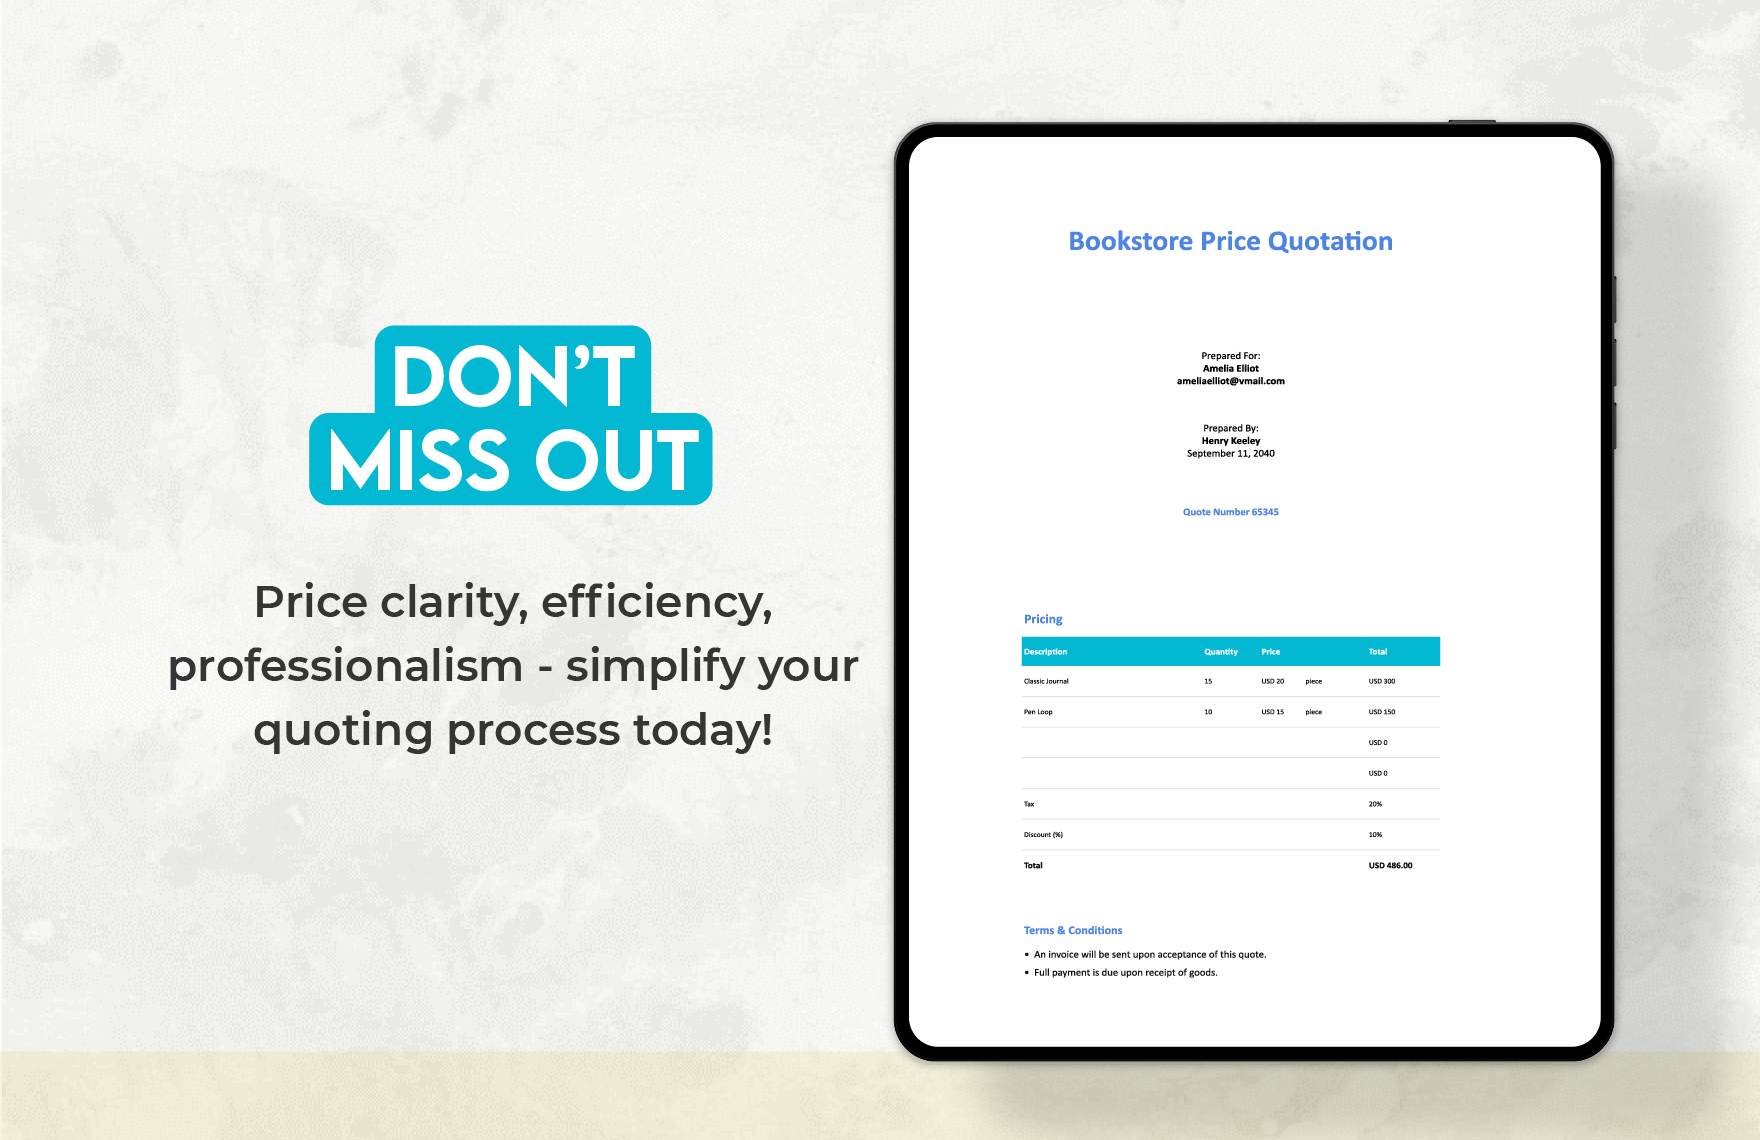 Simple Price Quotation Template